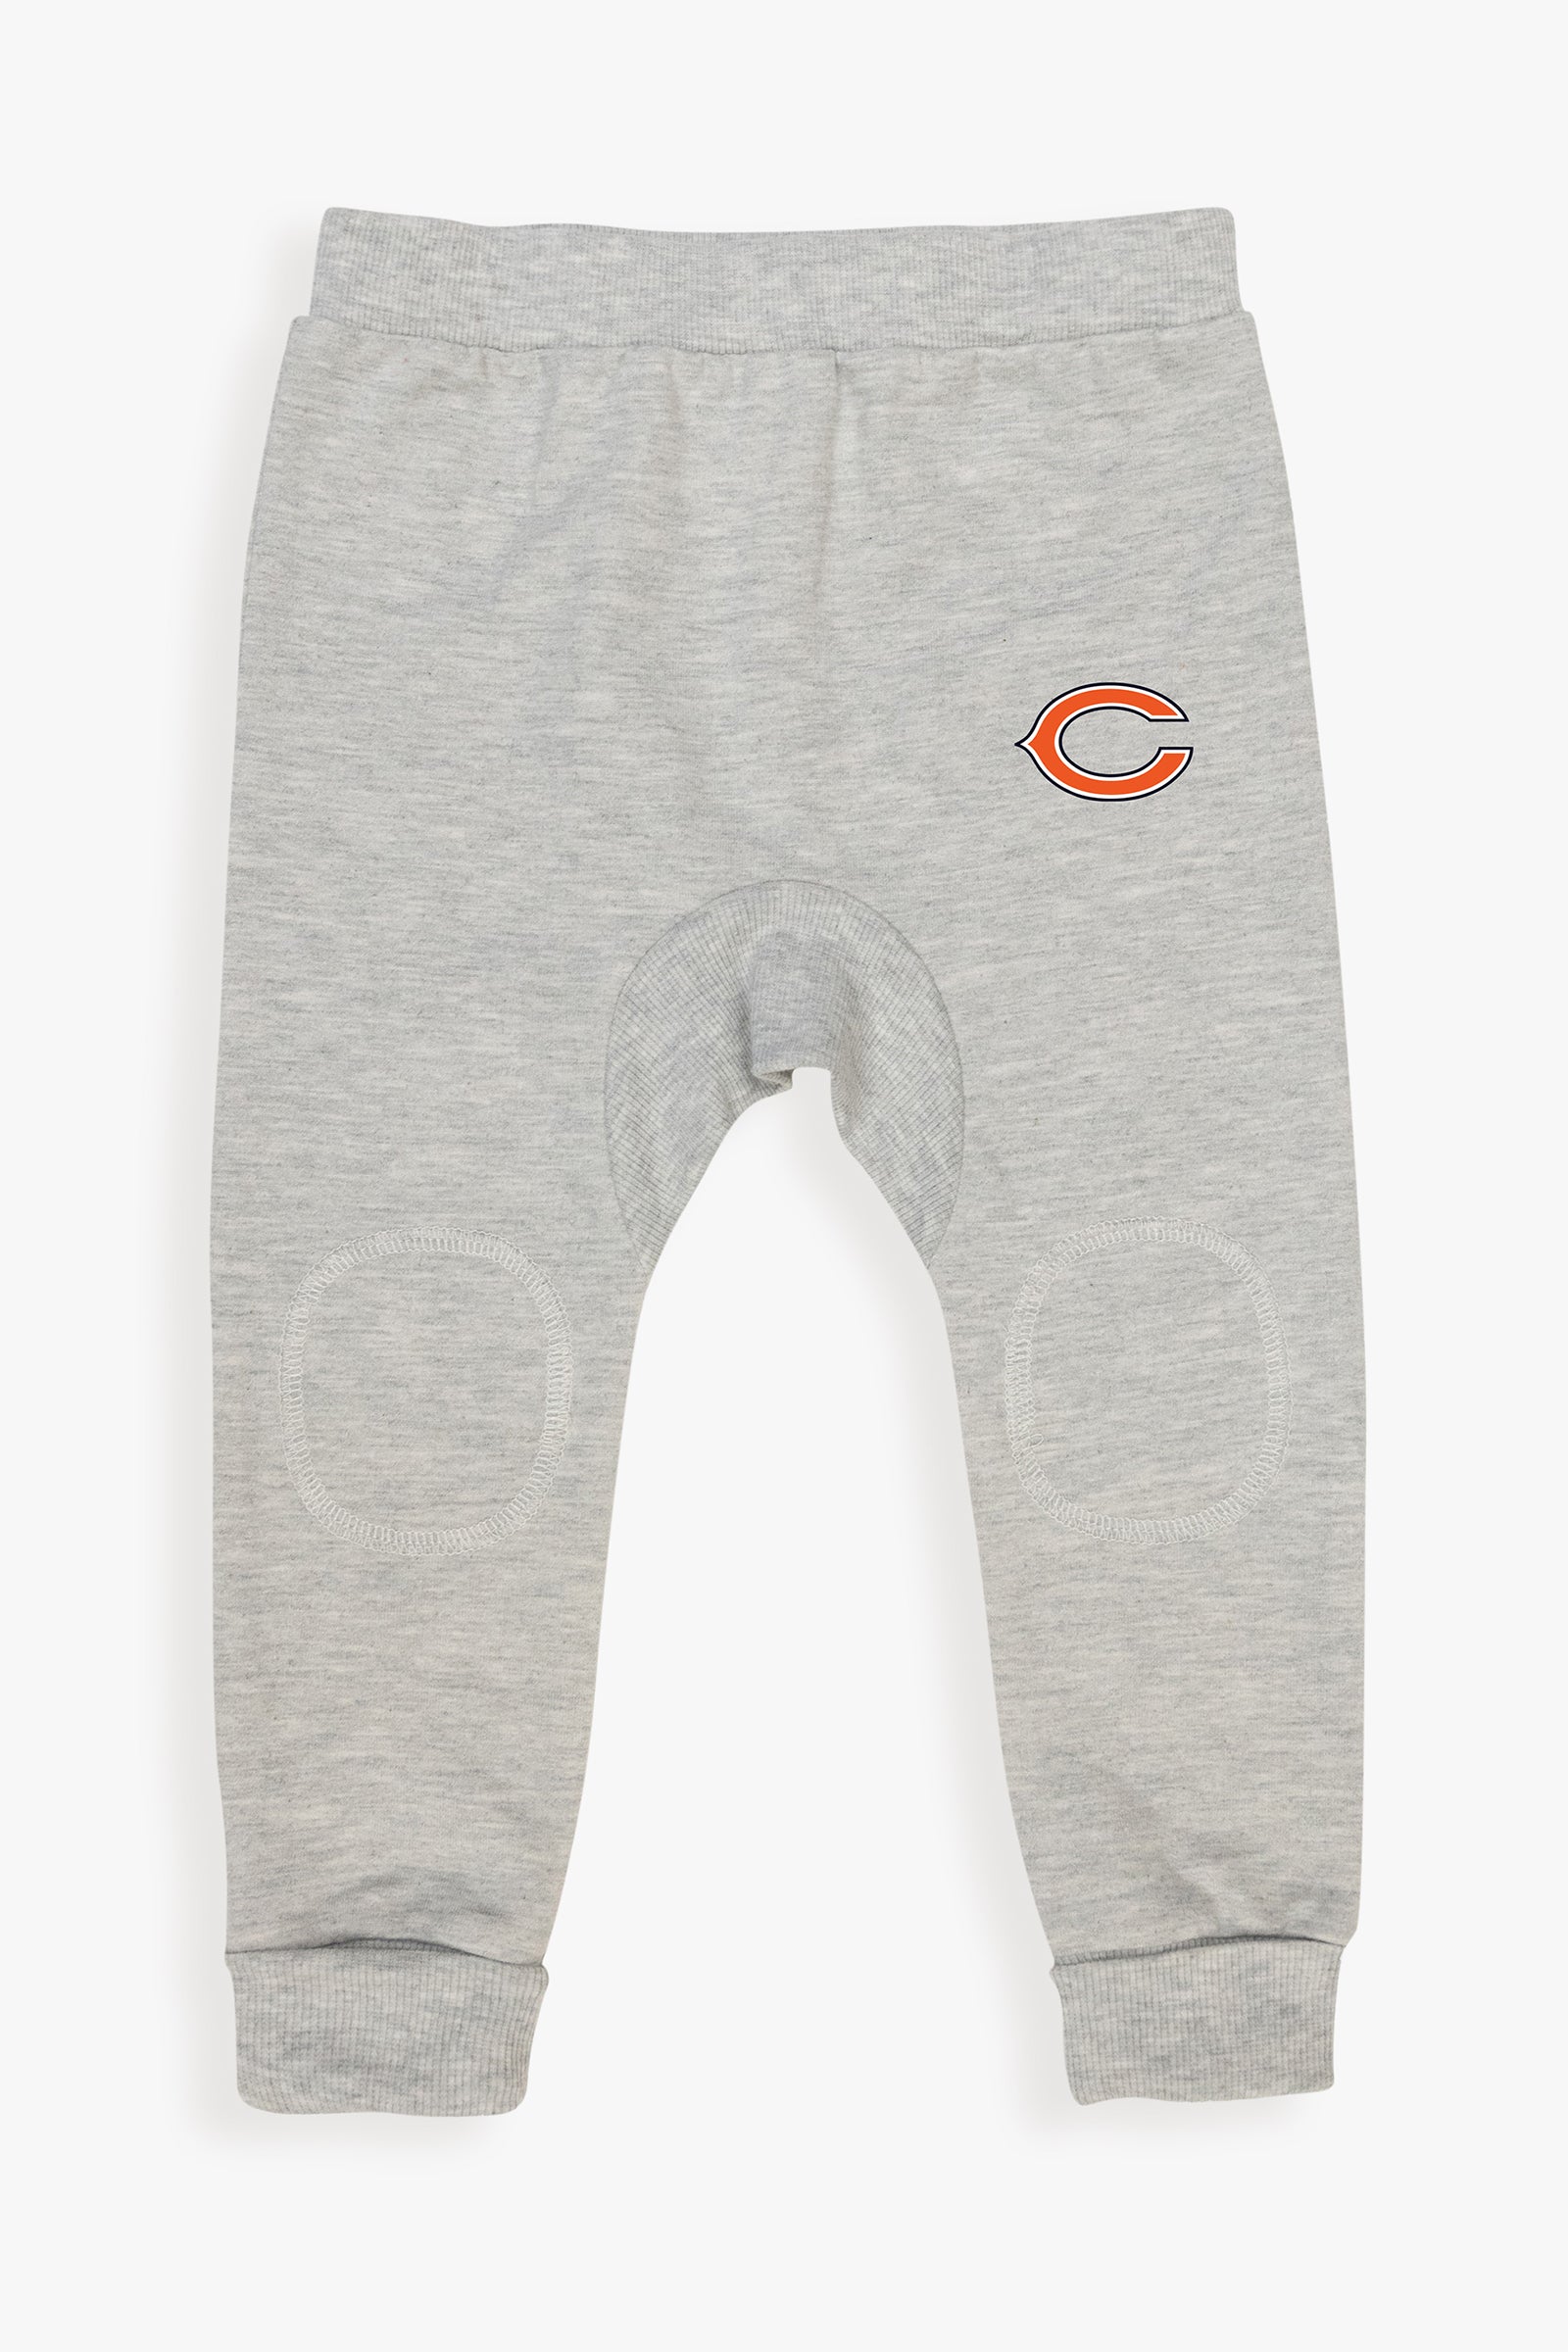 Gertex NFL Baby Grey French Terry Pants